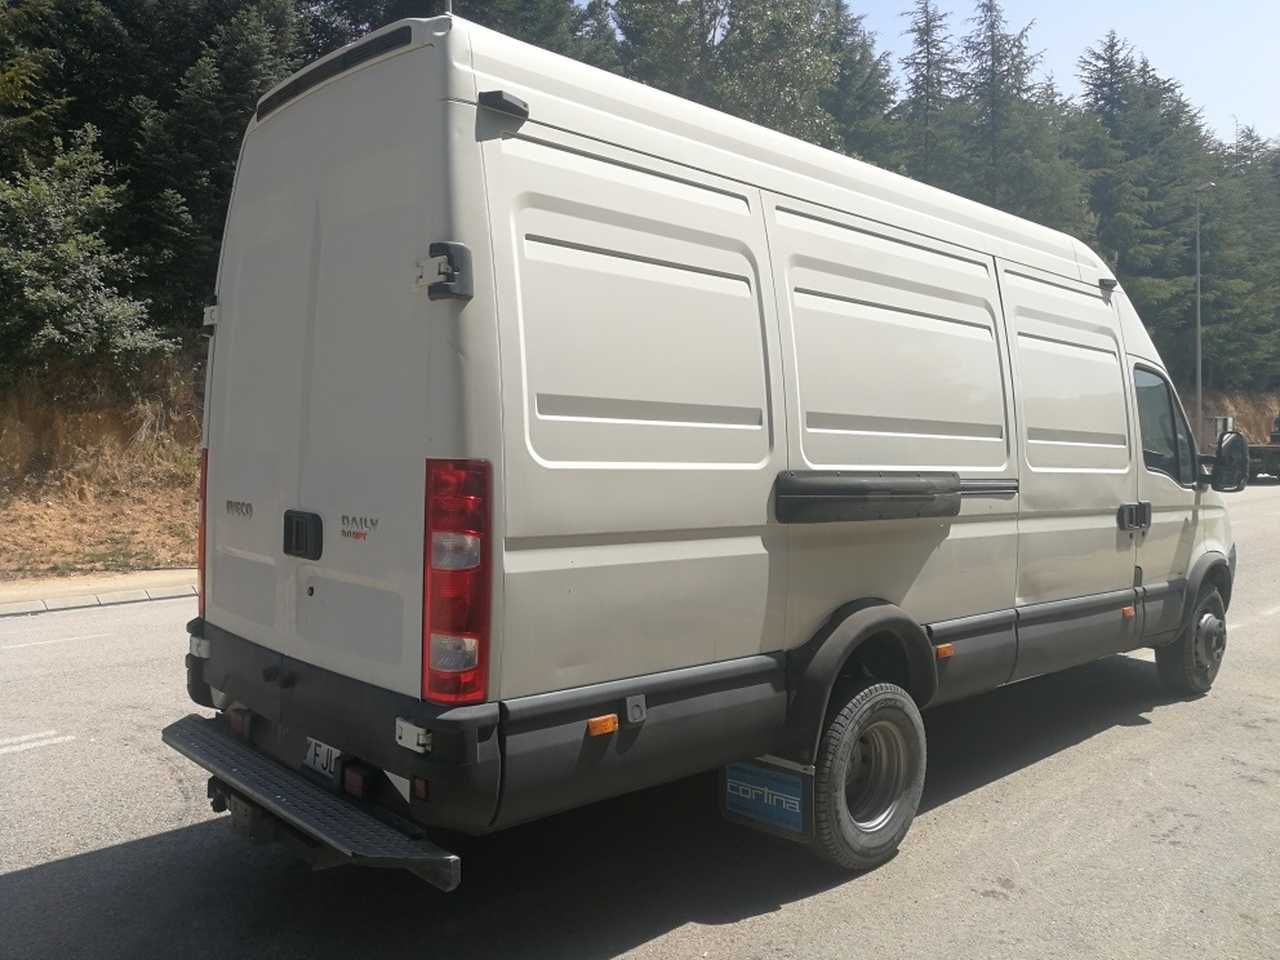 Foto Iveco Daily 3